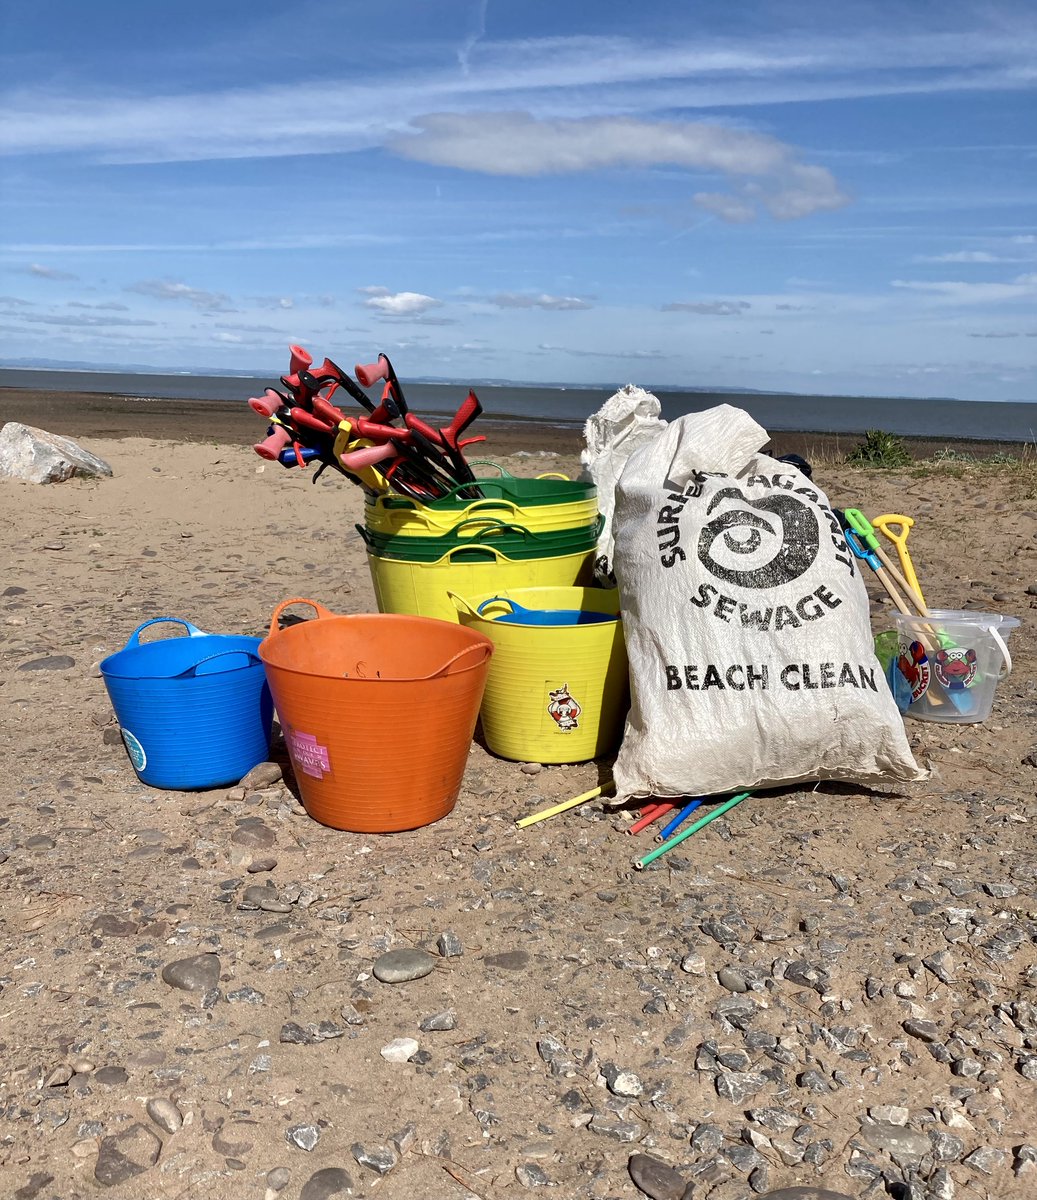 Don't forget about this weekend's beach cleans!

🌊Saturday - Join #PlasticFreeMinehead for a mass litter pick of Minehead beach ➡️ bit.ly/47Xzm21

🌊Sunday - Join #PlasticFreeExmoor for their Dunster beach clean!➡️ bit.ly/47ReNEu

#SpruceUpTheSevern